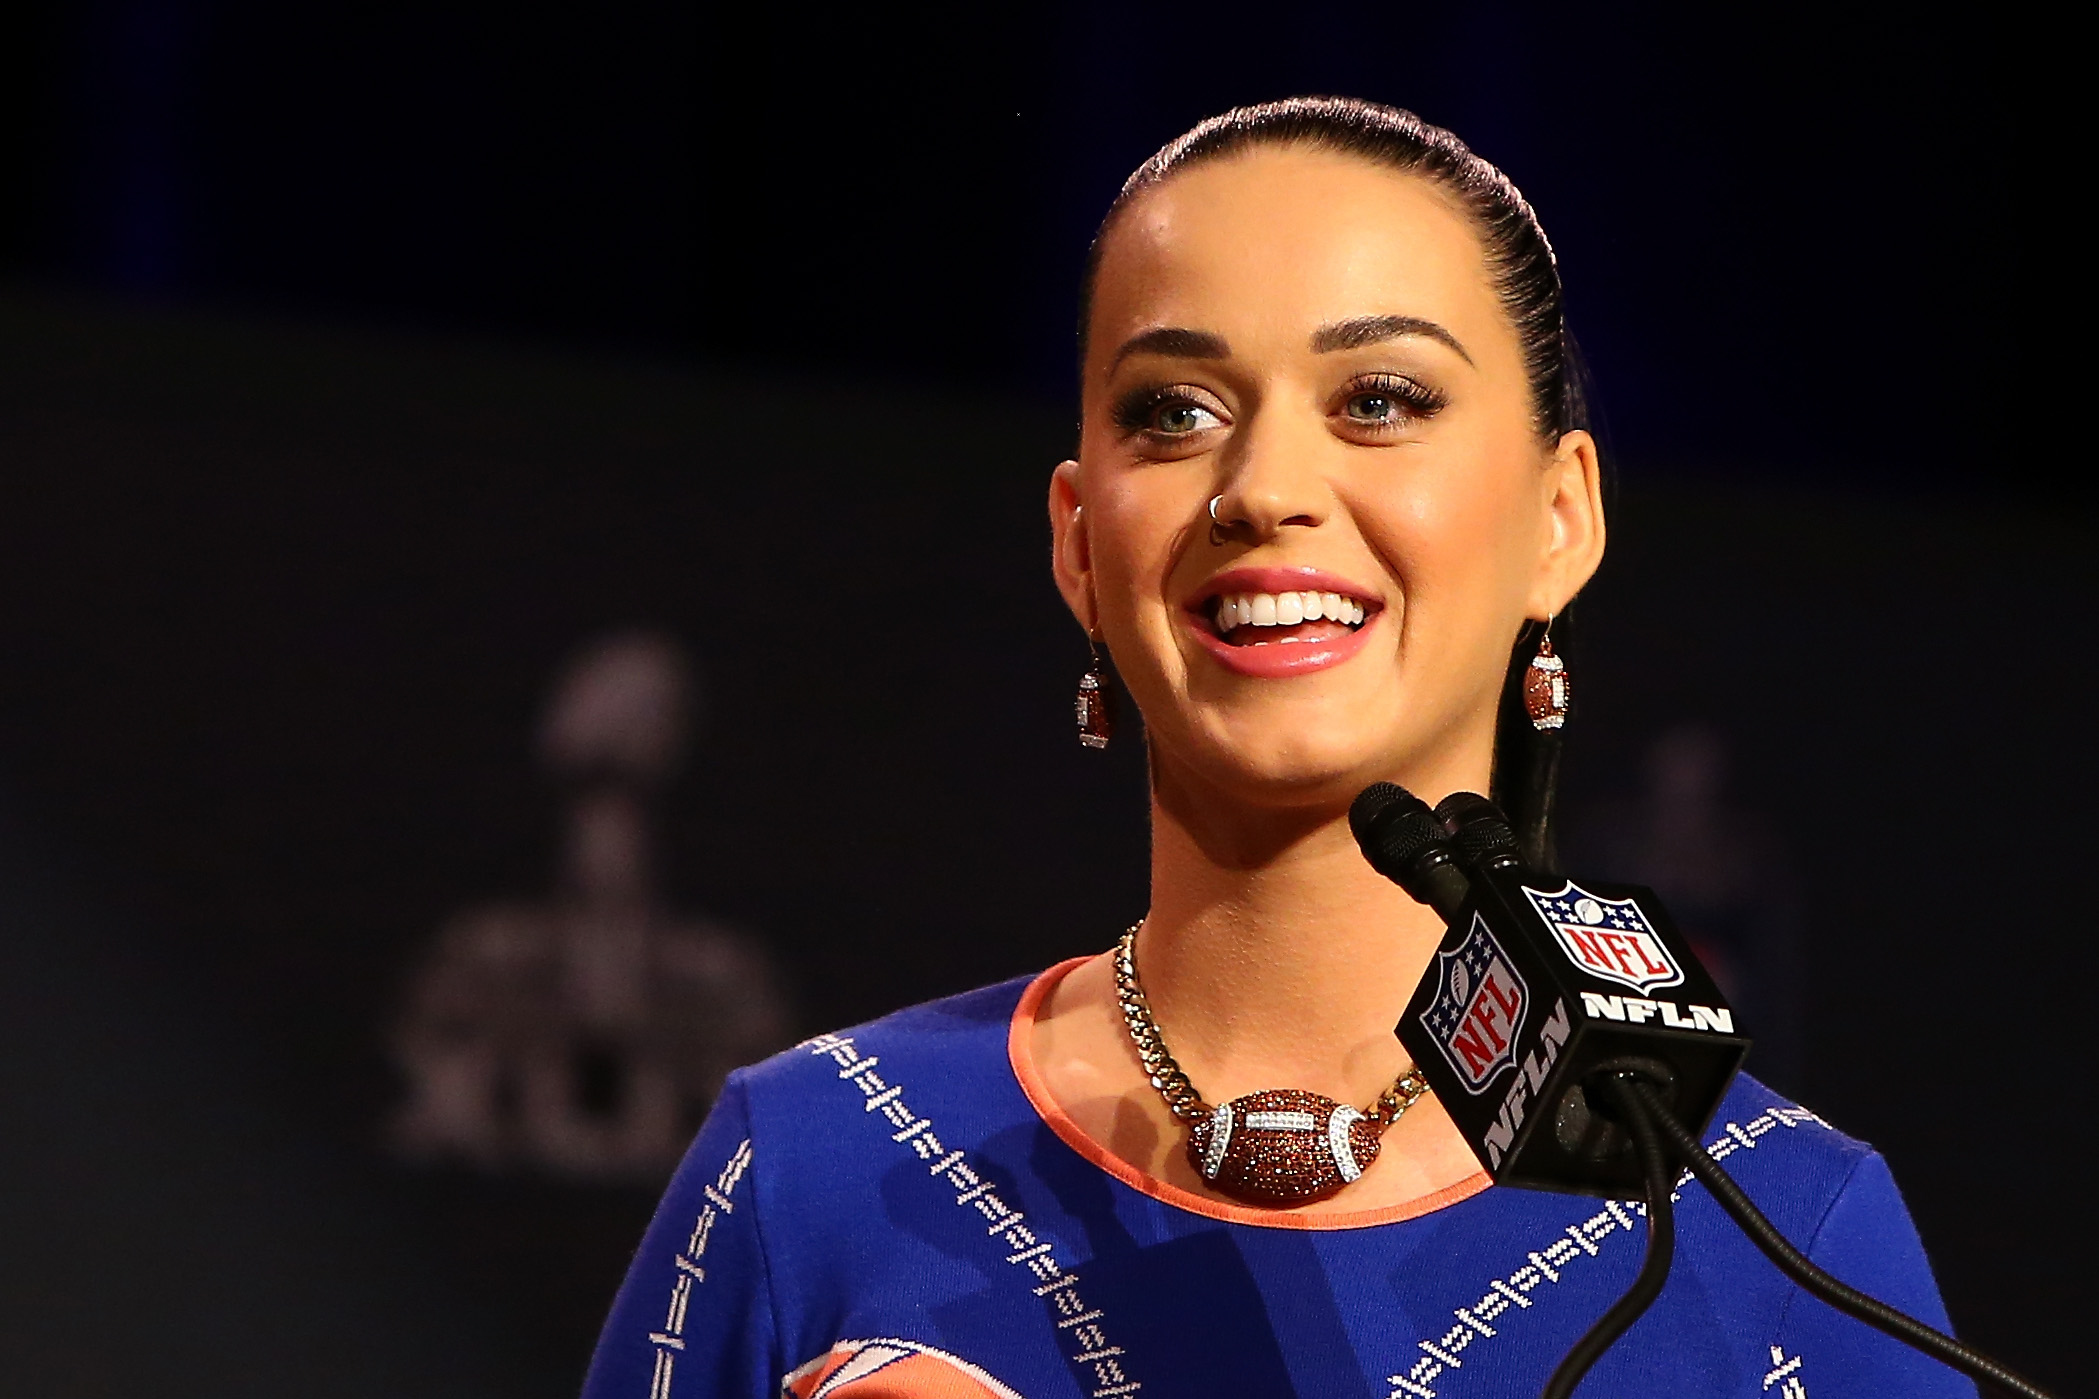 Katy Perry at the Pepsi Super Bowl XLIV Halftime Show Press Conference  in Phoenix on January 29, 2015